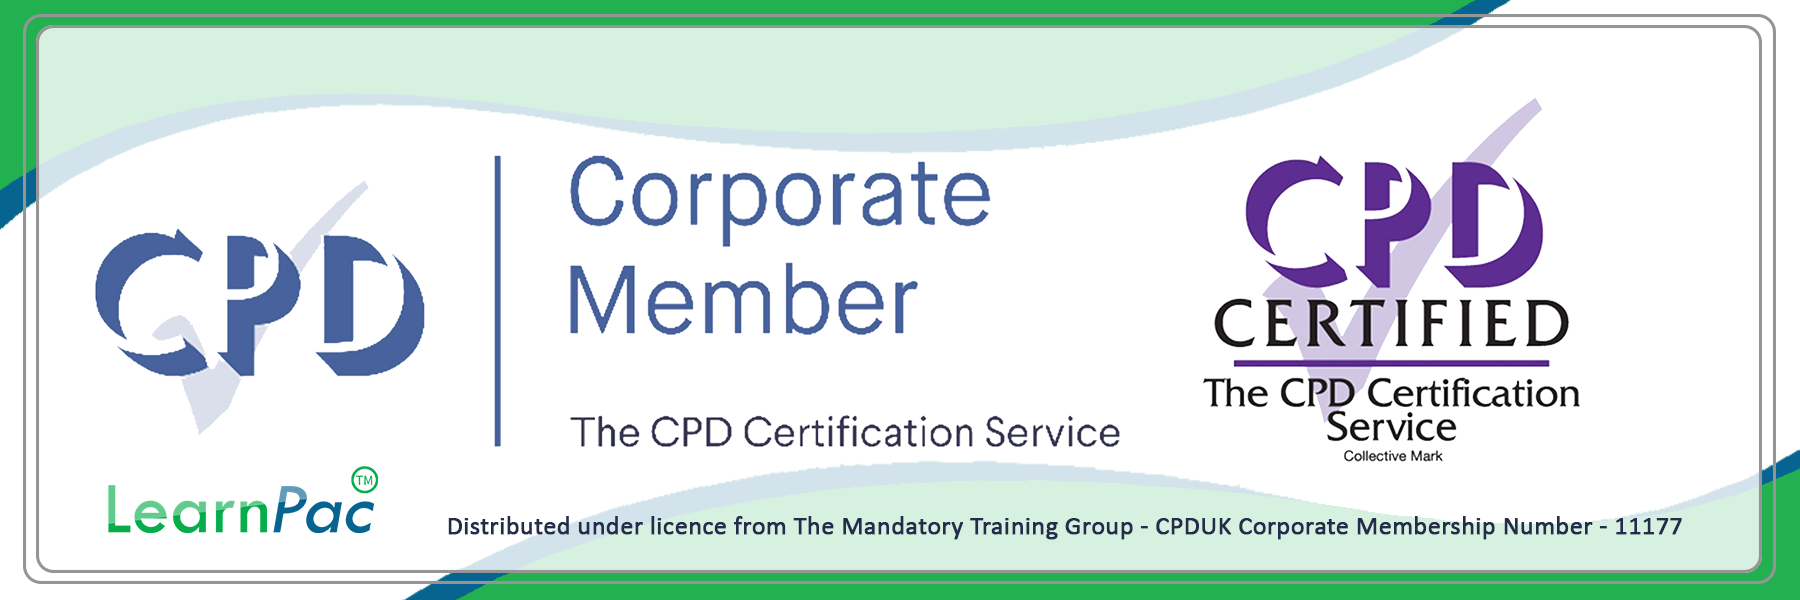 Health and Social Care Law - E-Learning Courses with Certificates - CPD Certified - LearnPac Systems UK -